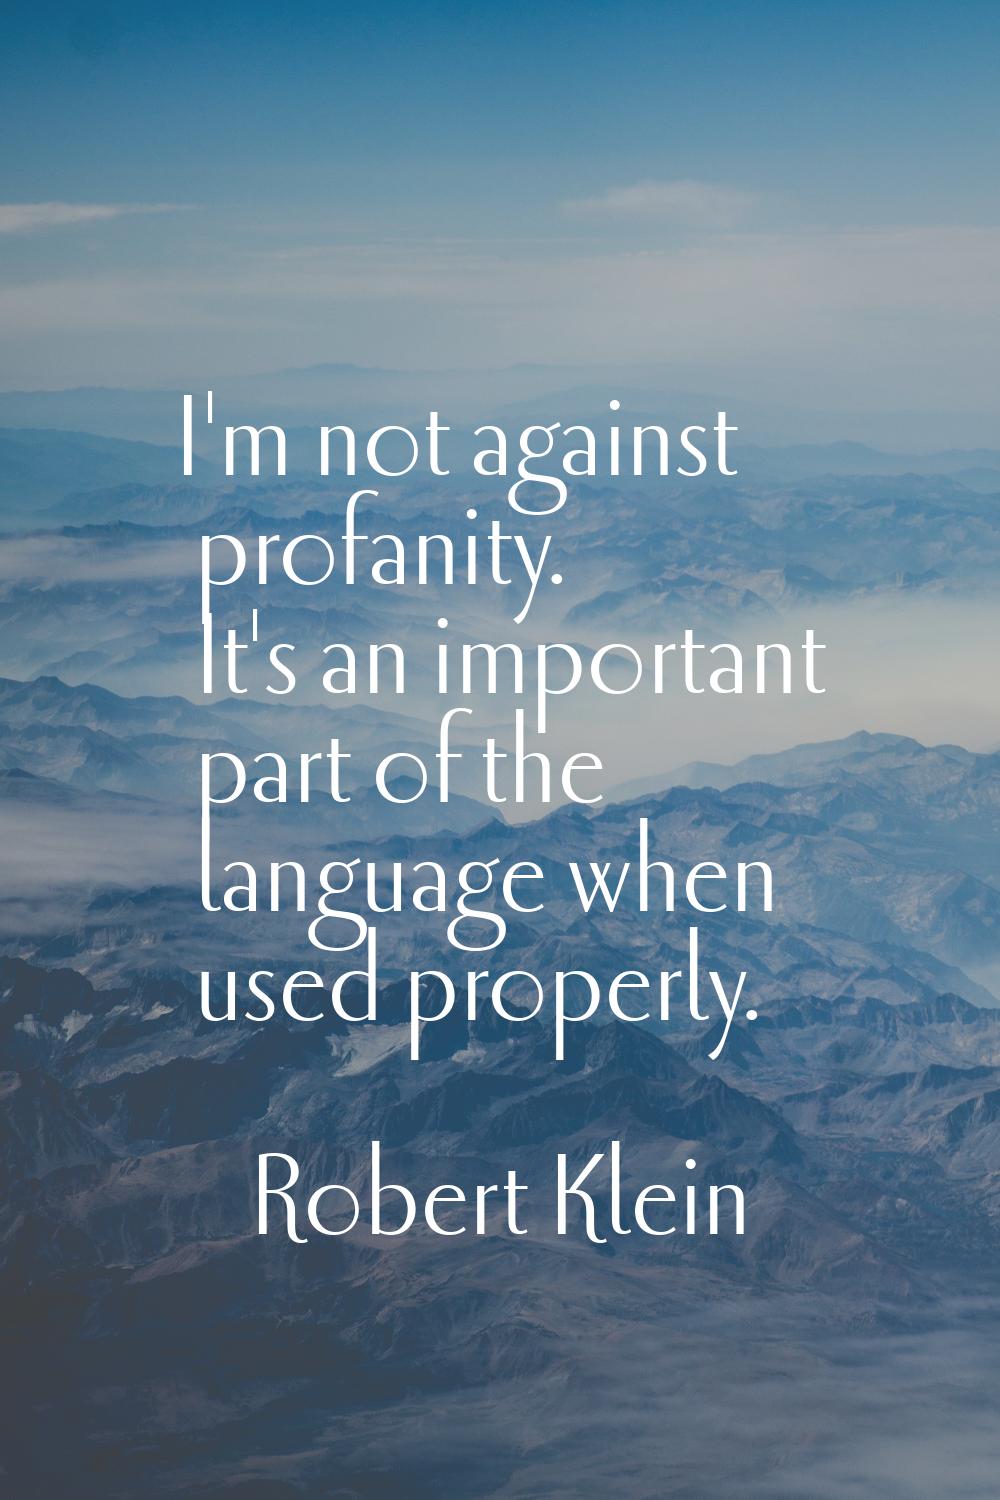 I'm not against profanity. It's an important part of the language when used properly.